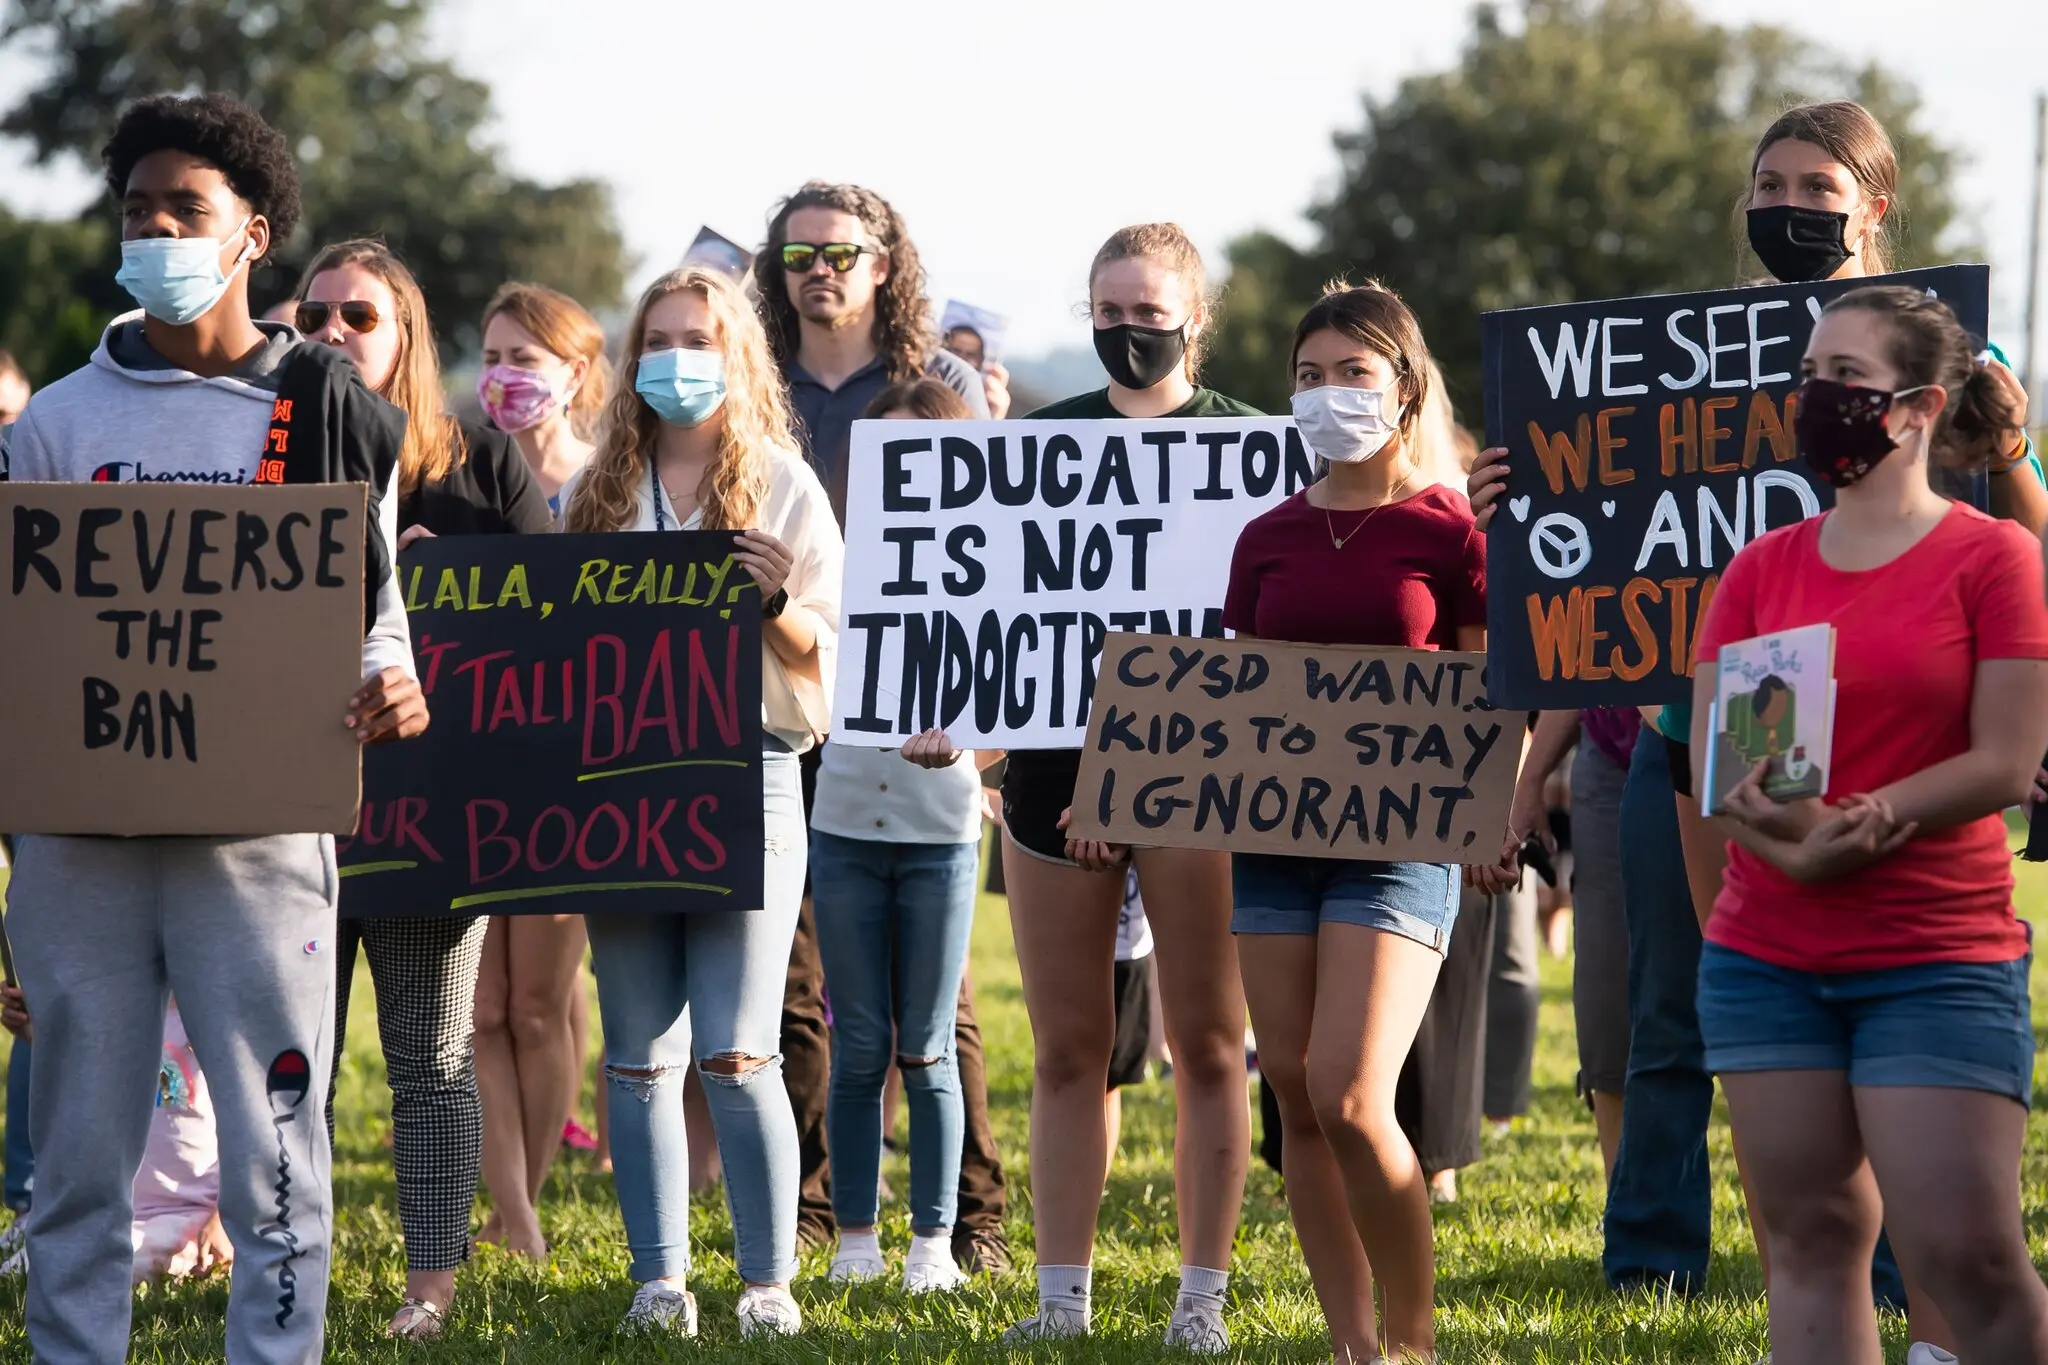 Students protesting banned books